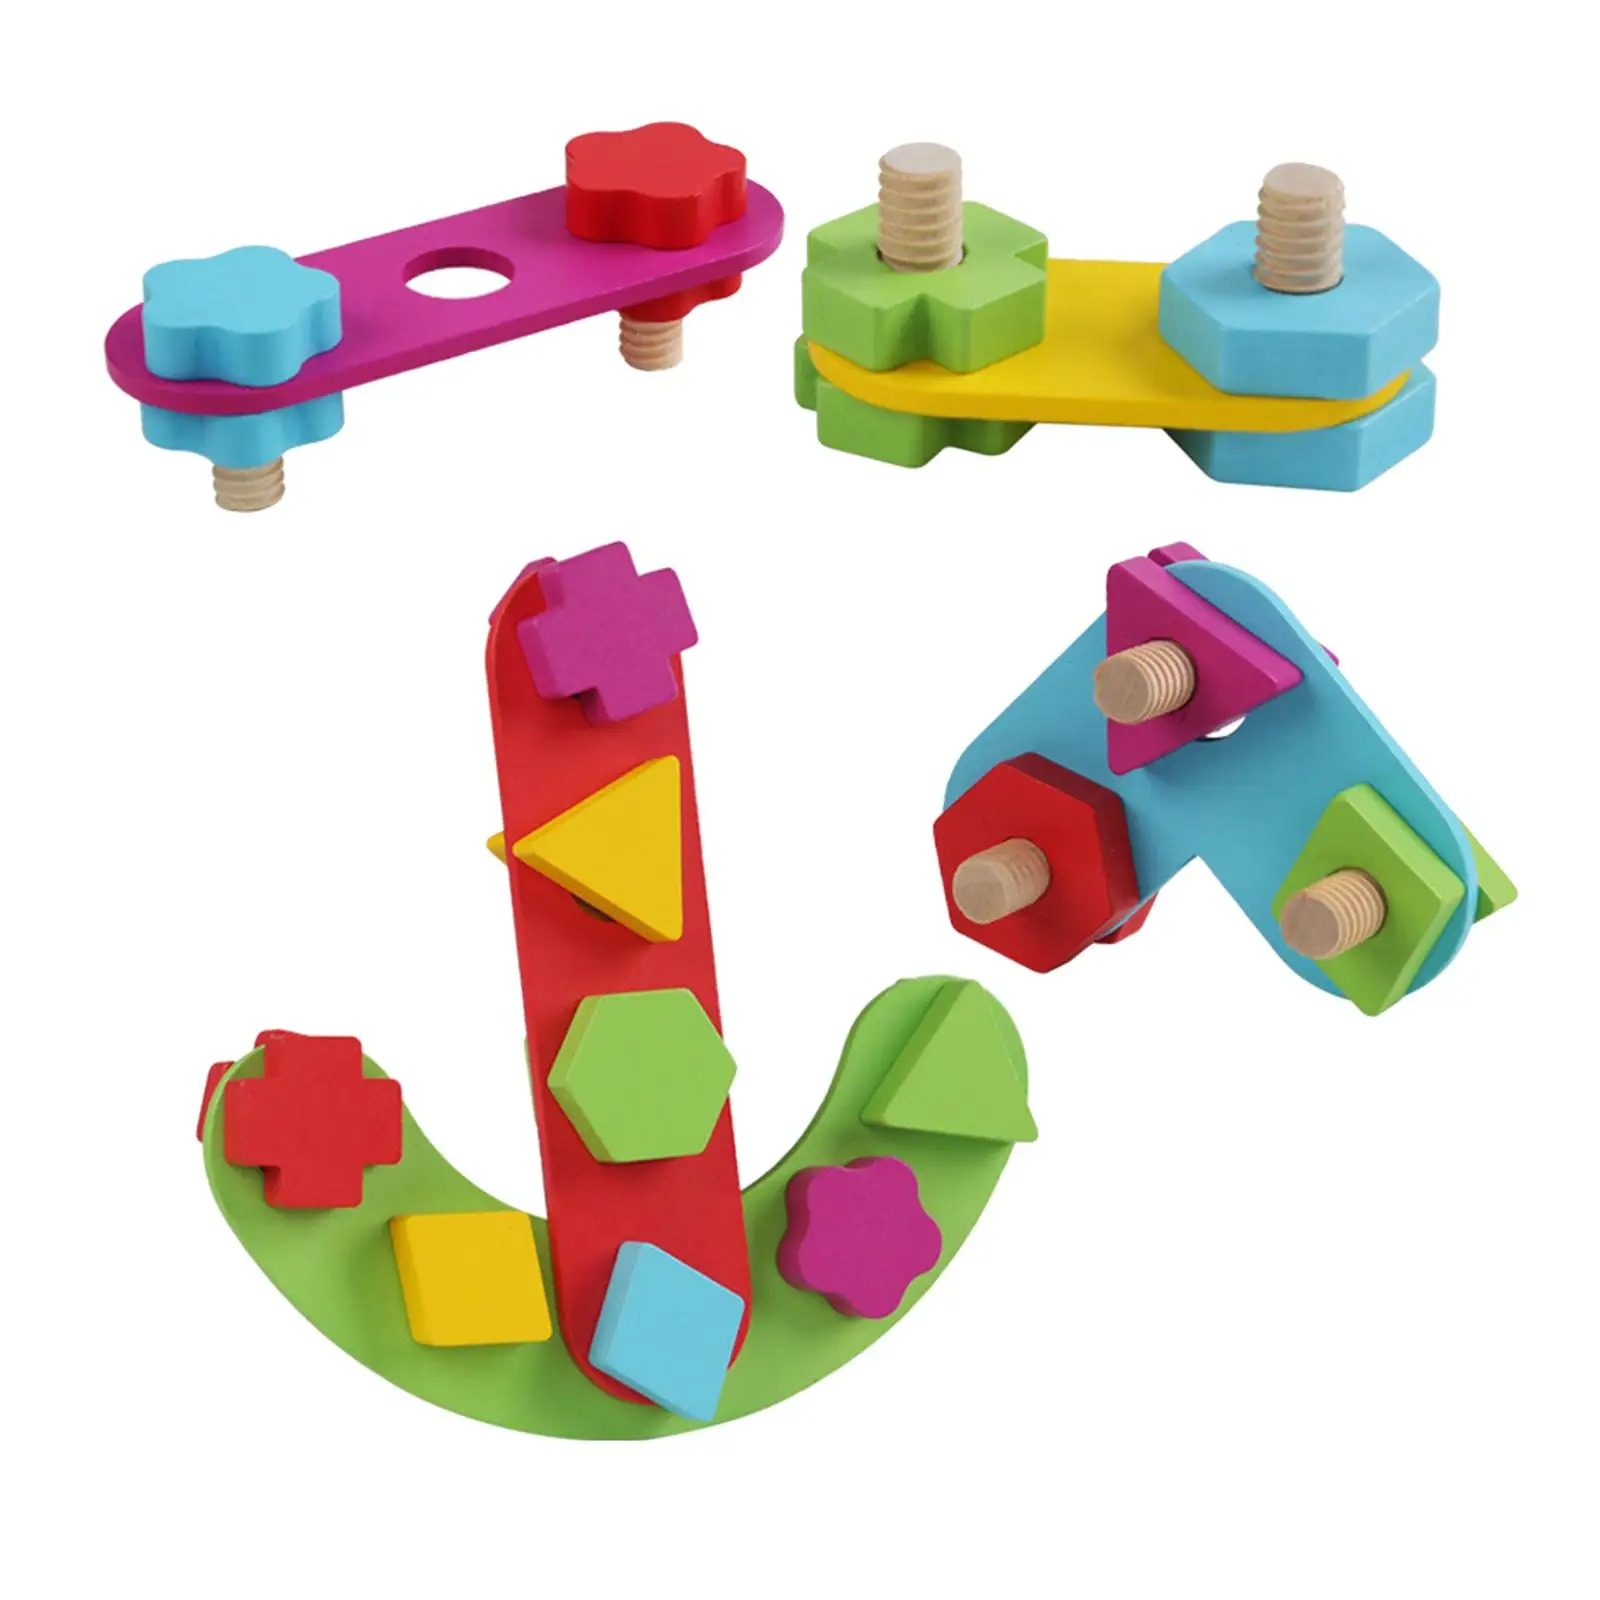 Kids Nuts and Bolts Toy Montessori Educational Toy for Birthday Gift Kids